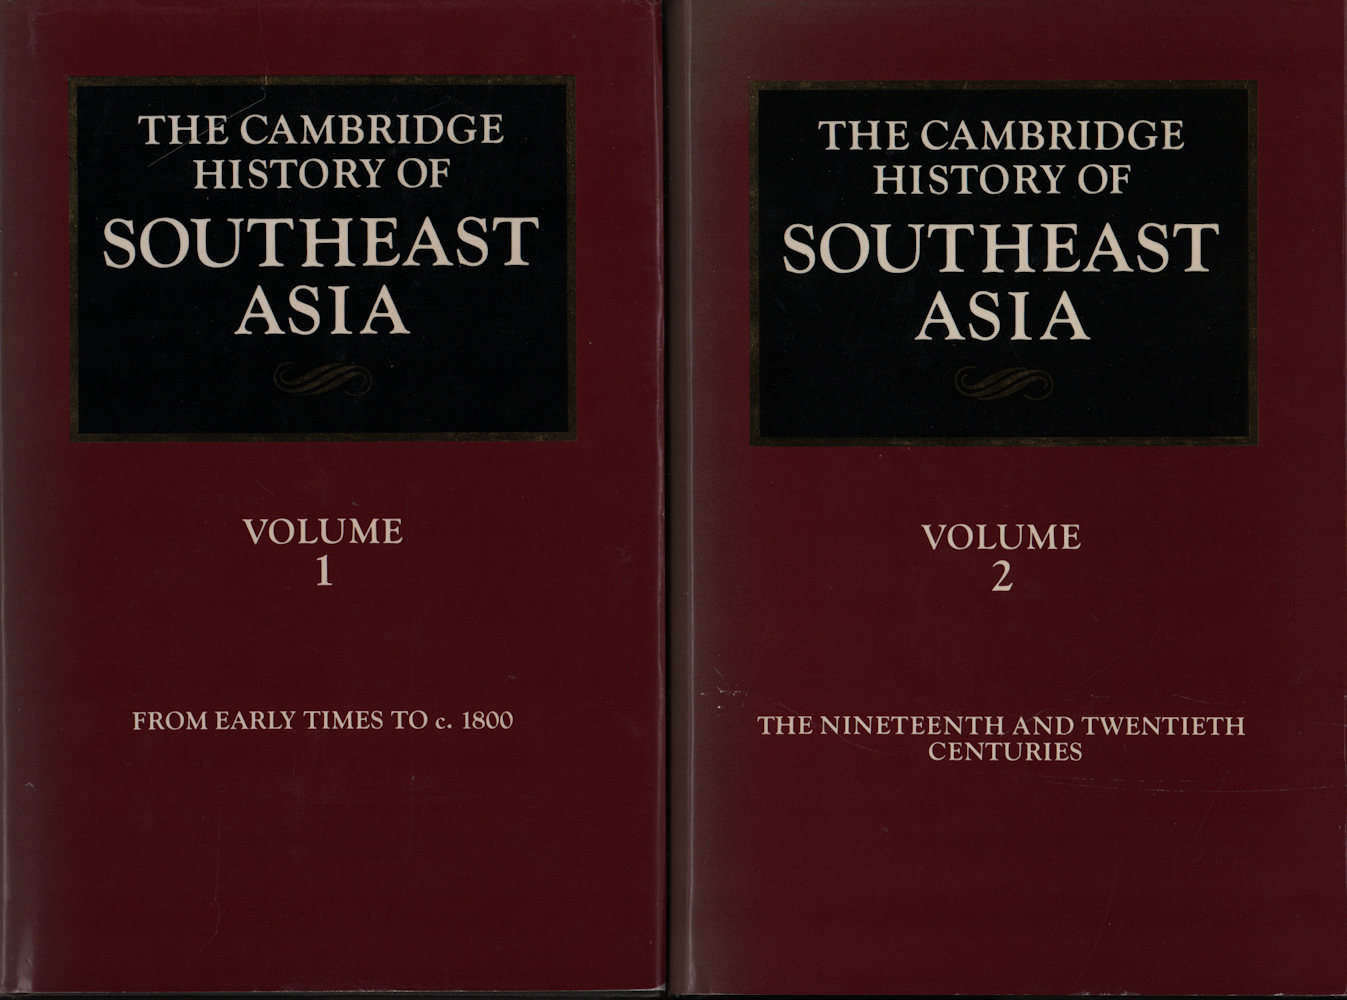 The Cambridge History of Southeast Asia. 2 Volumes. Vol. I: From Early Times to c1800: Vol. II: The Nineteenth and Twentieth Centuries. - TARLING, NICHOLAS (EDITOR).